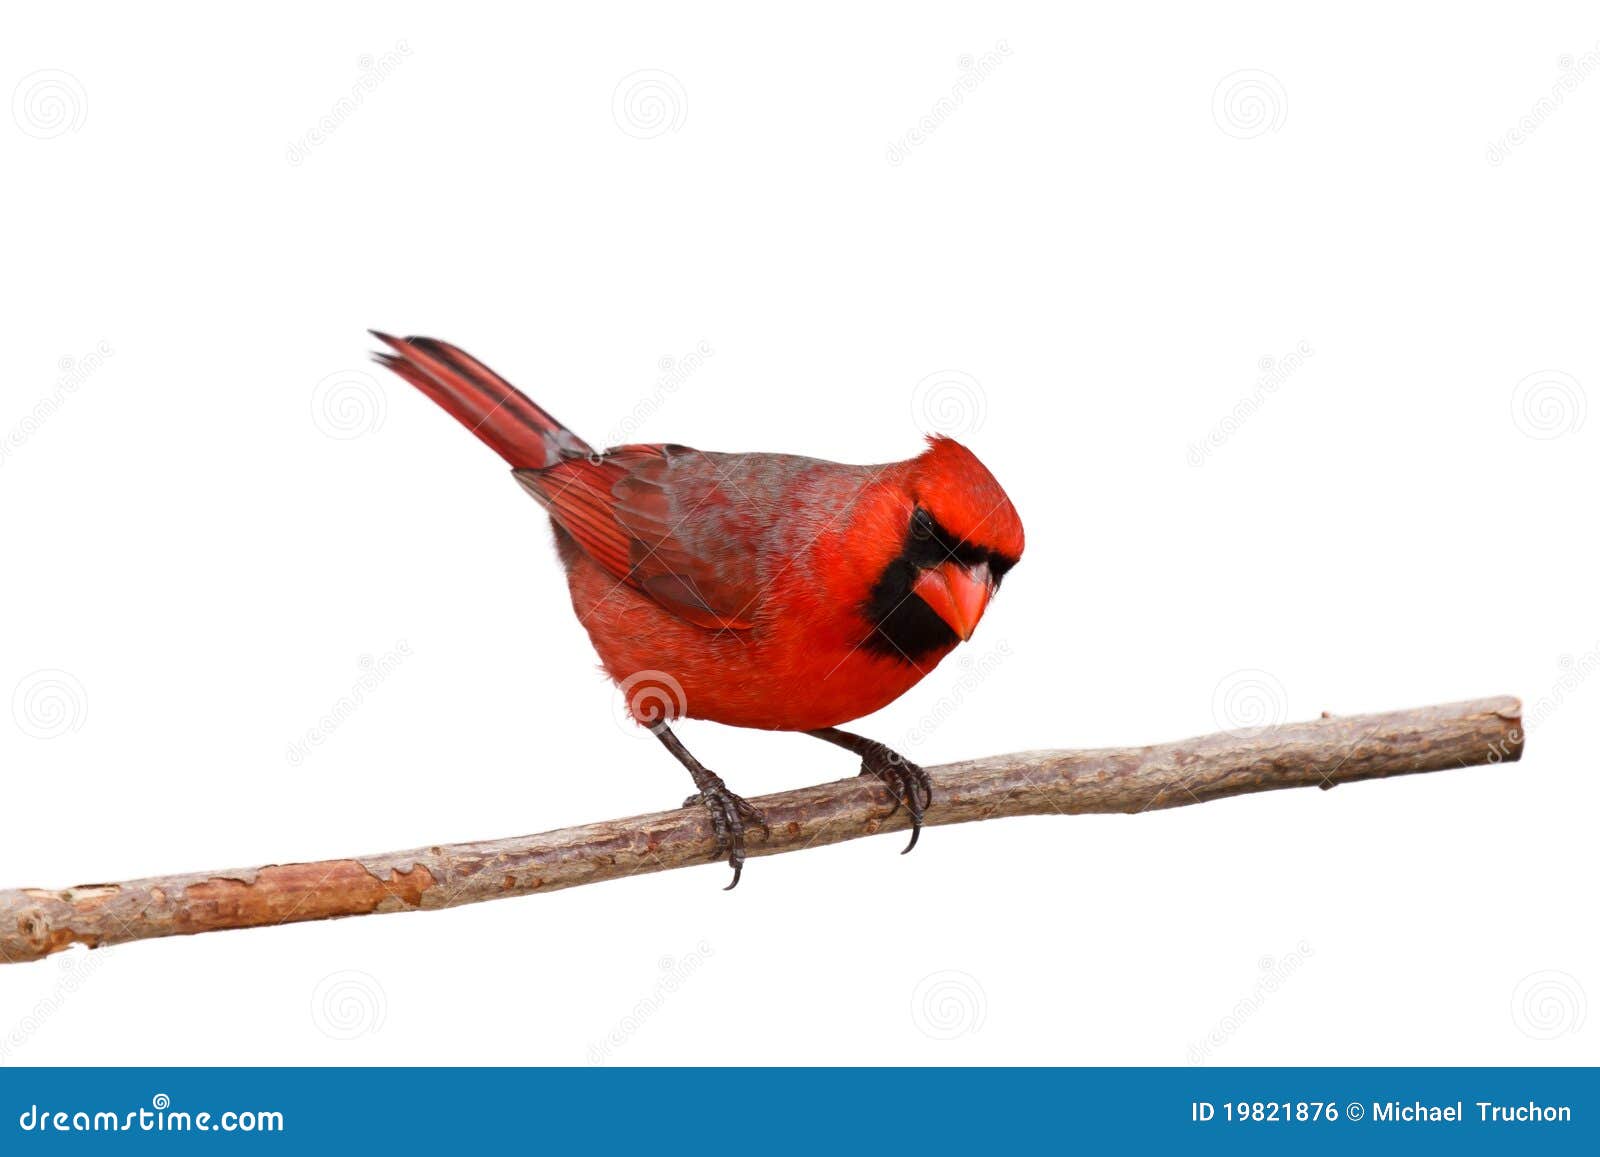 Bright Red Male Cardinal On A Branch Stock Photo Image of cardinal